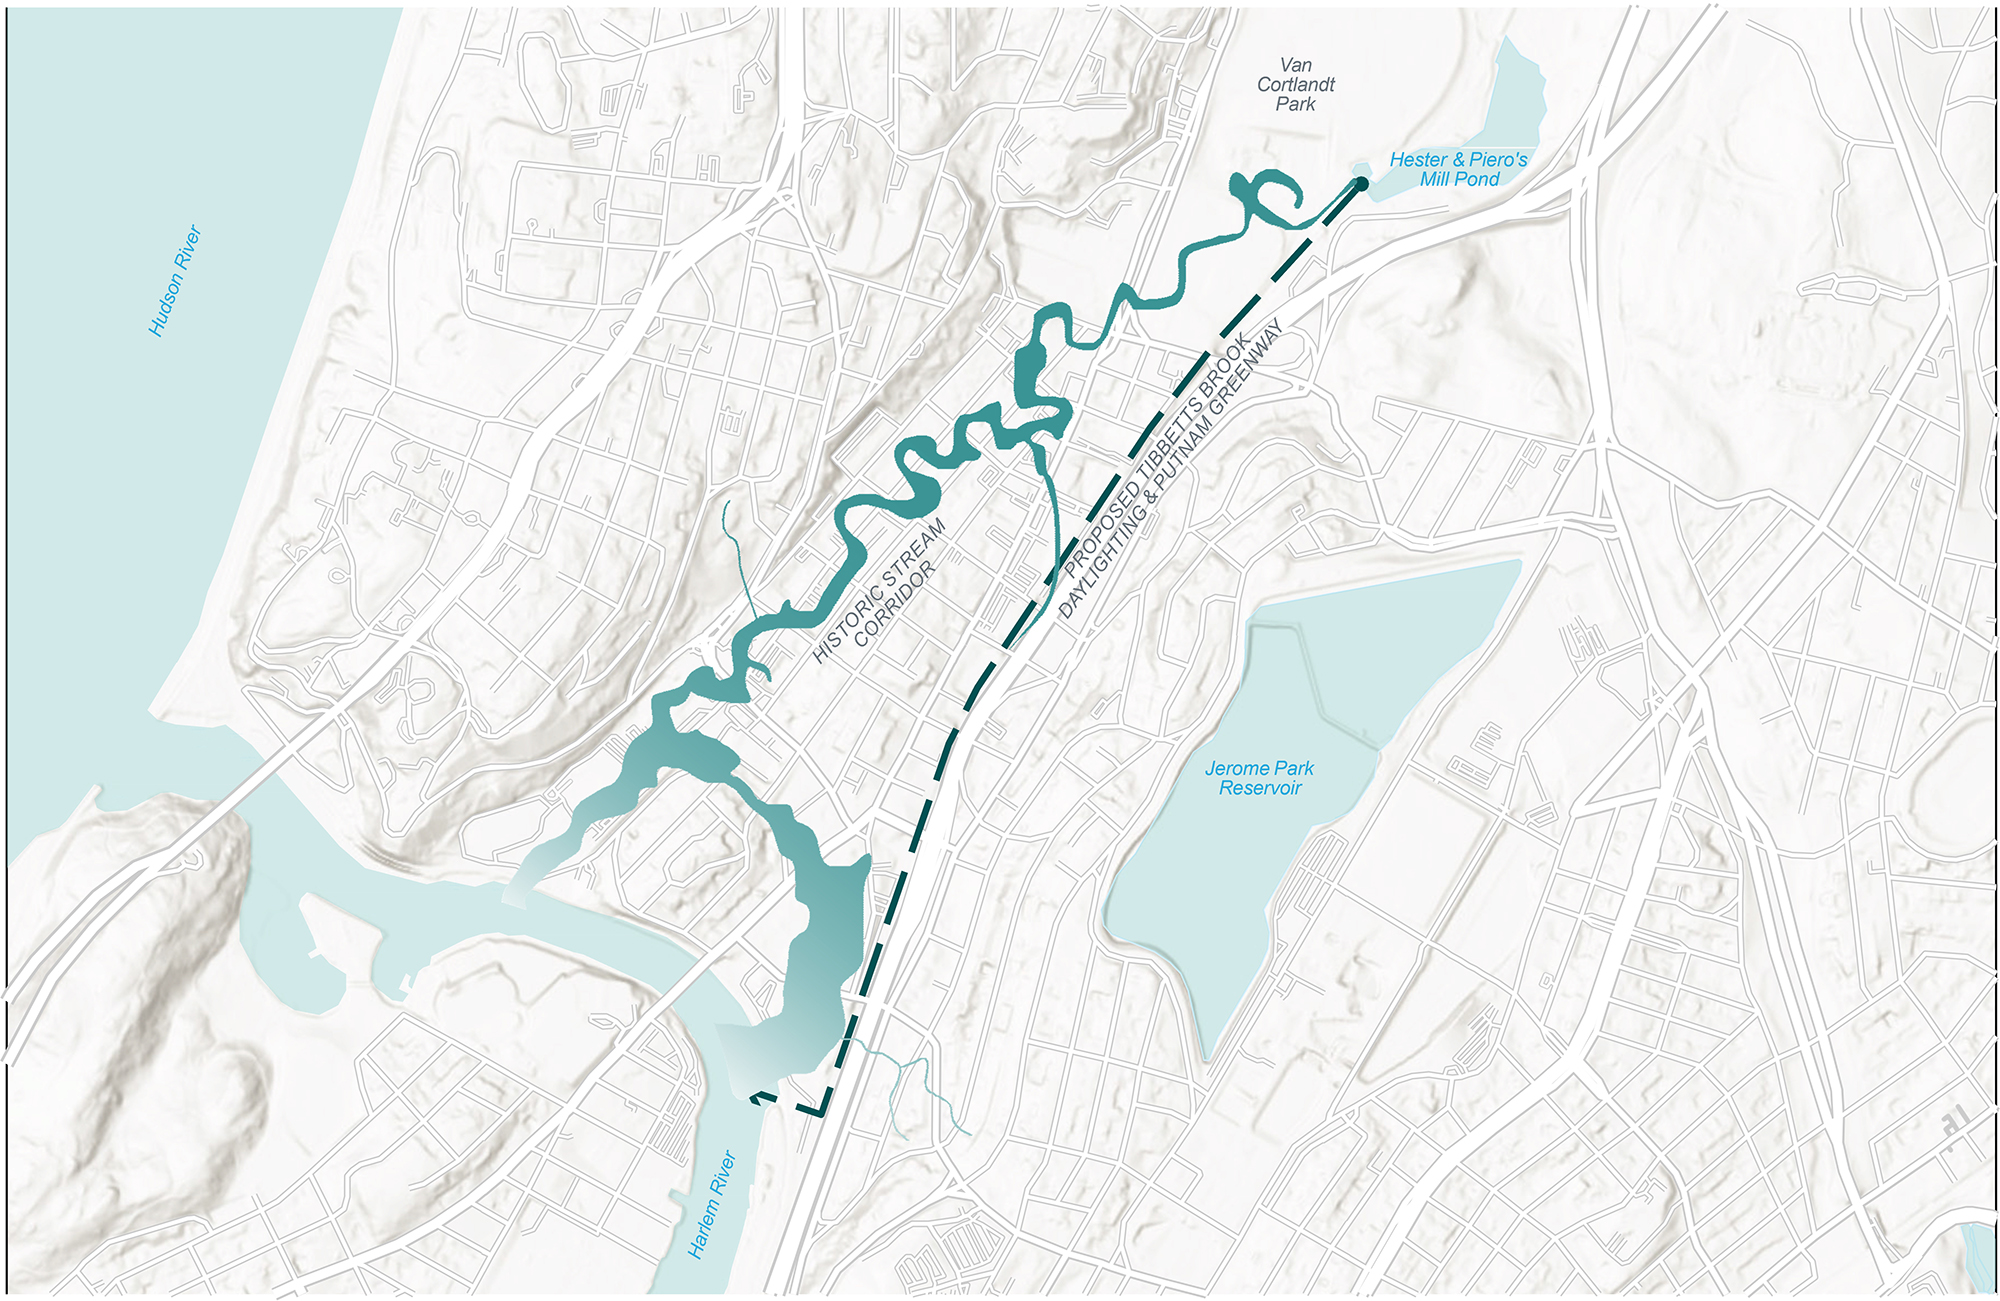 This map shows the historic location of Tibbetts Brook between Van Cortlandt Park and the Harlem River. (Image courtesy of the New York City Department of Environmental Protection)